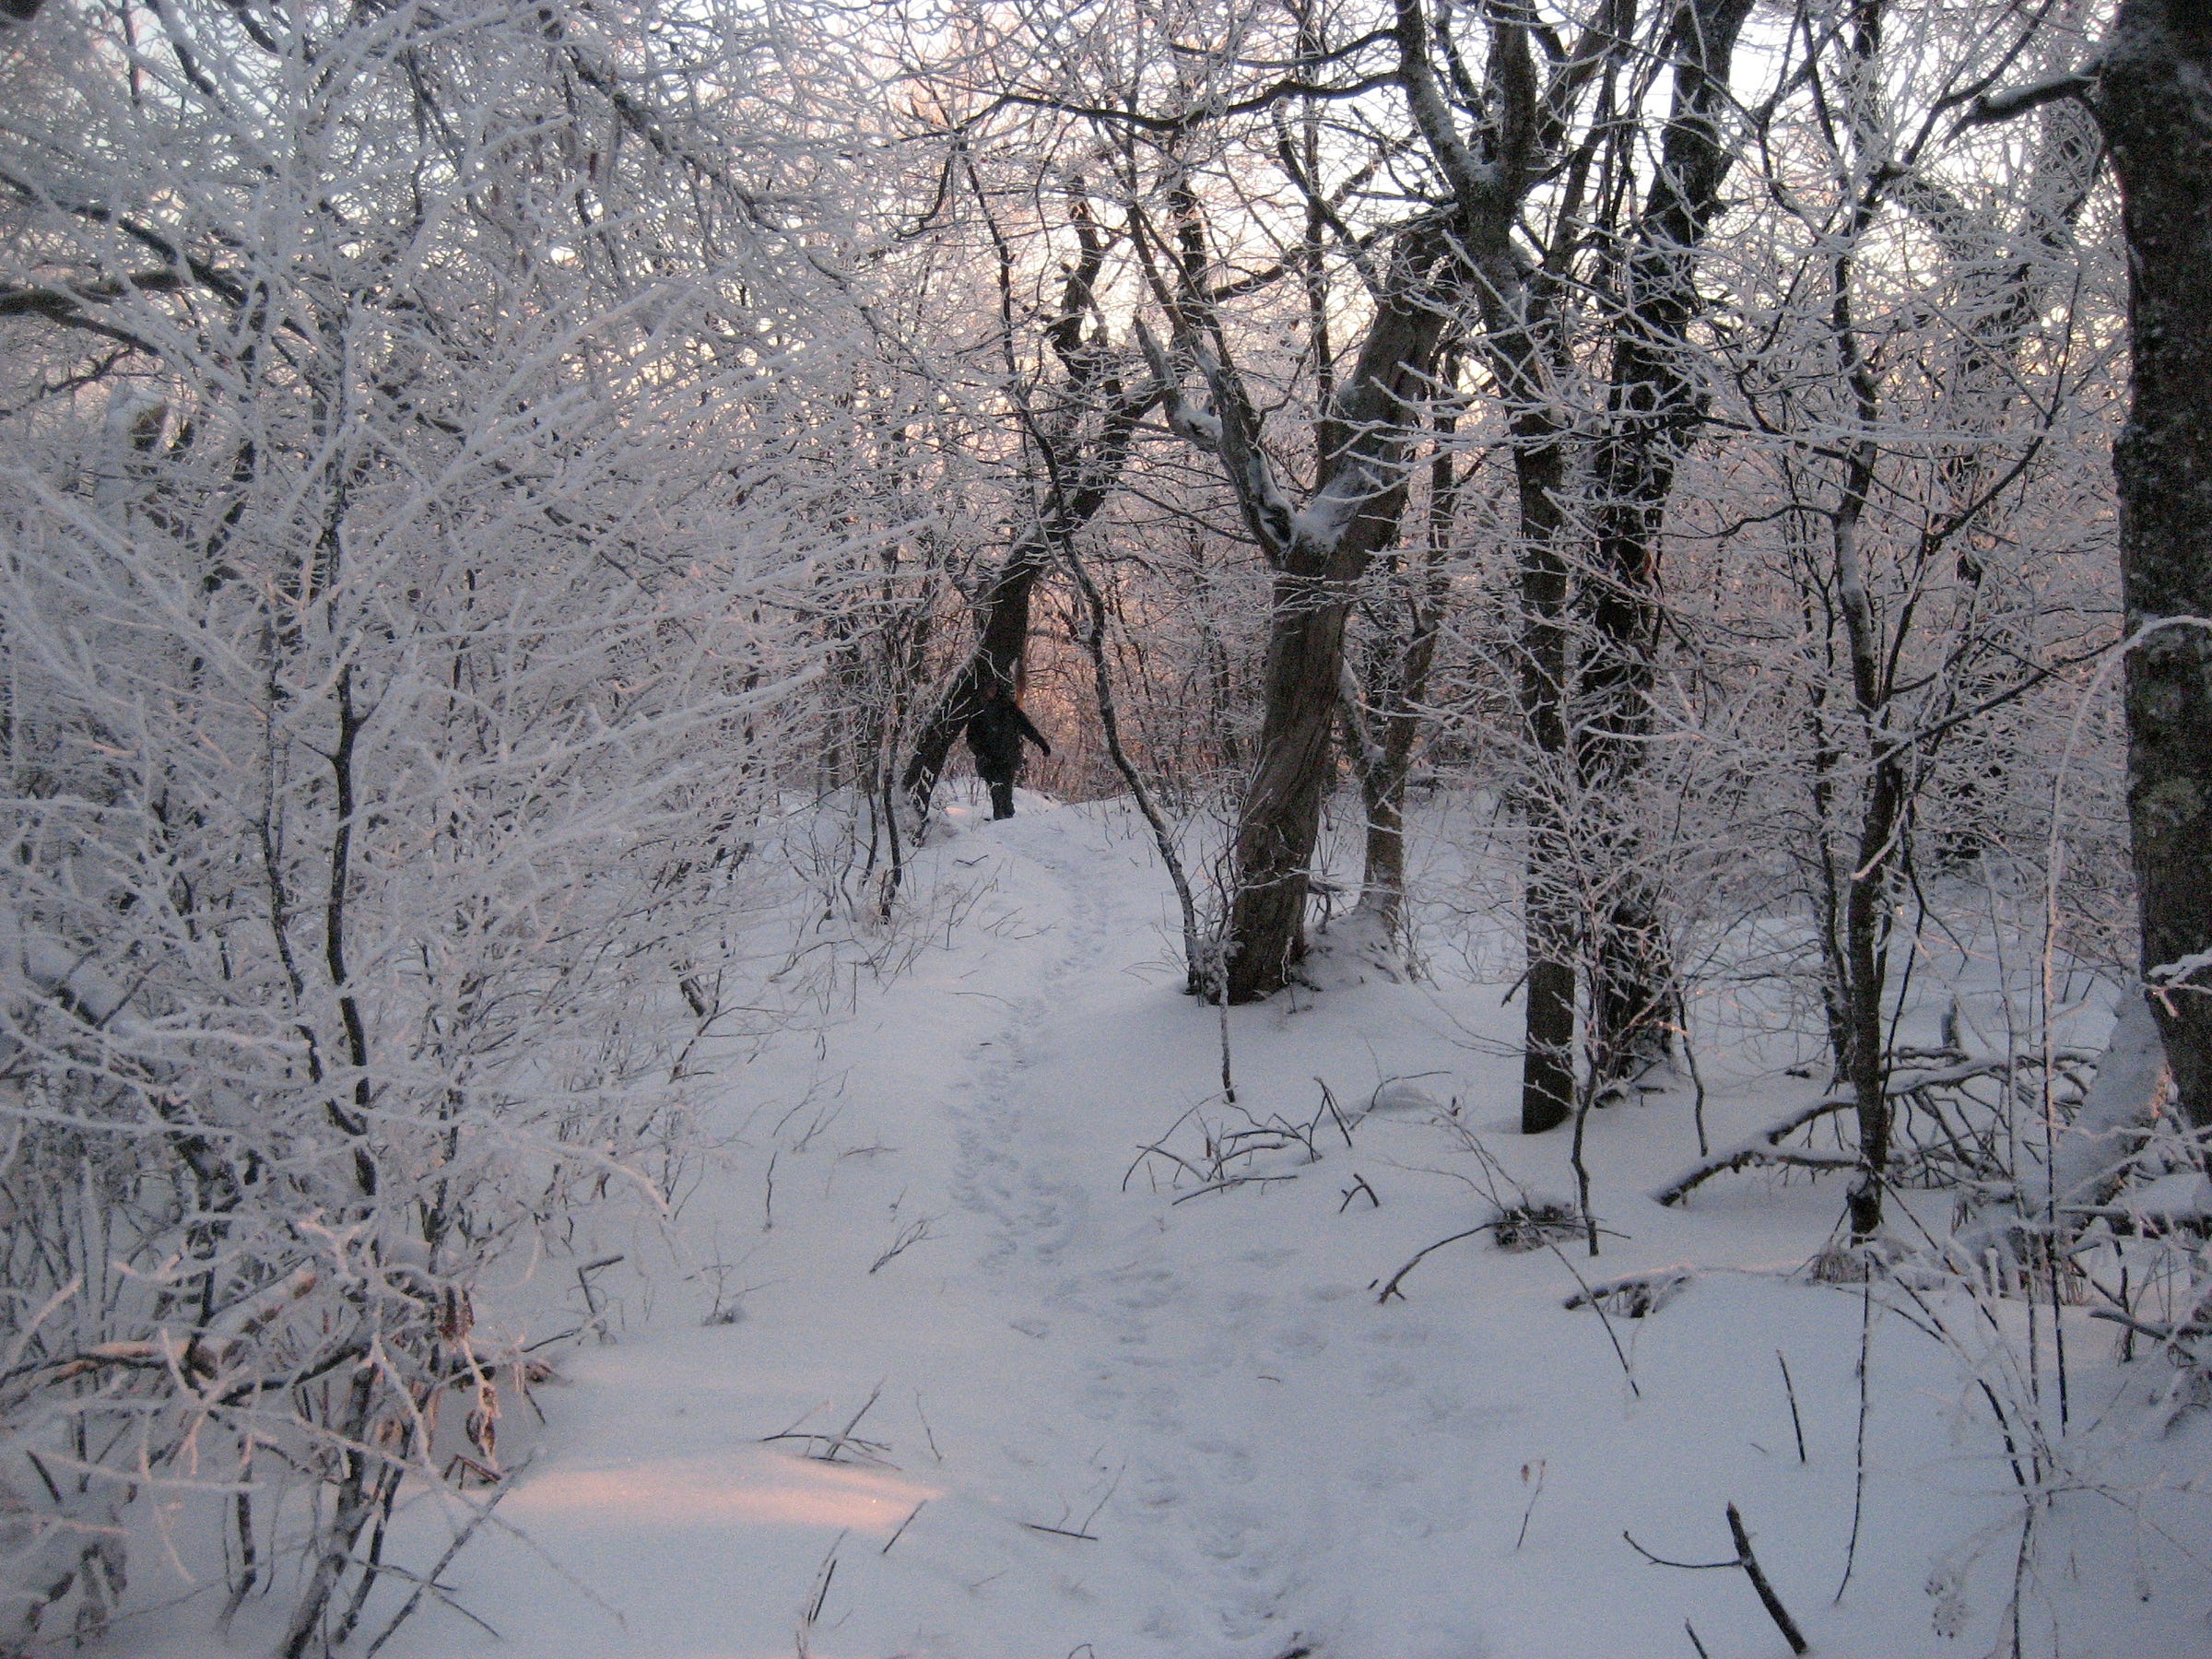 the millbrook ridge trail, winding through the frozen forest